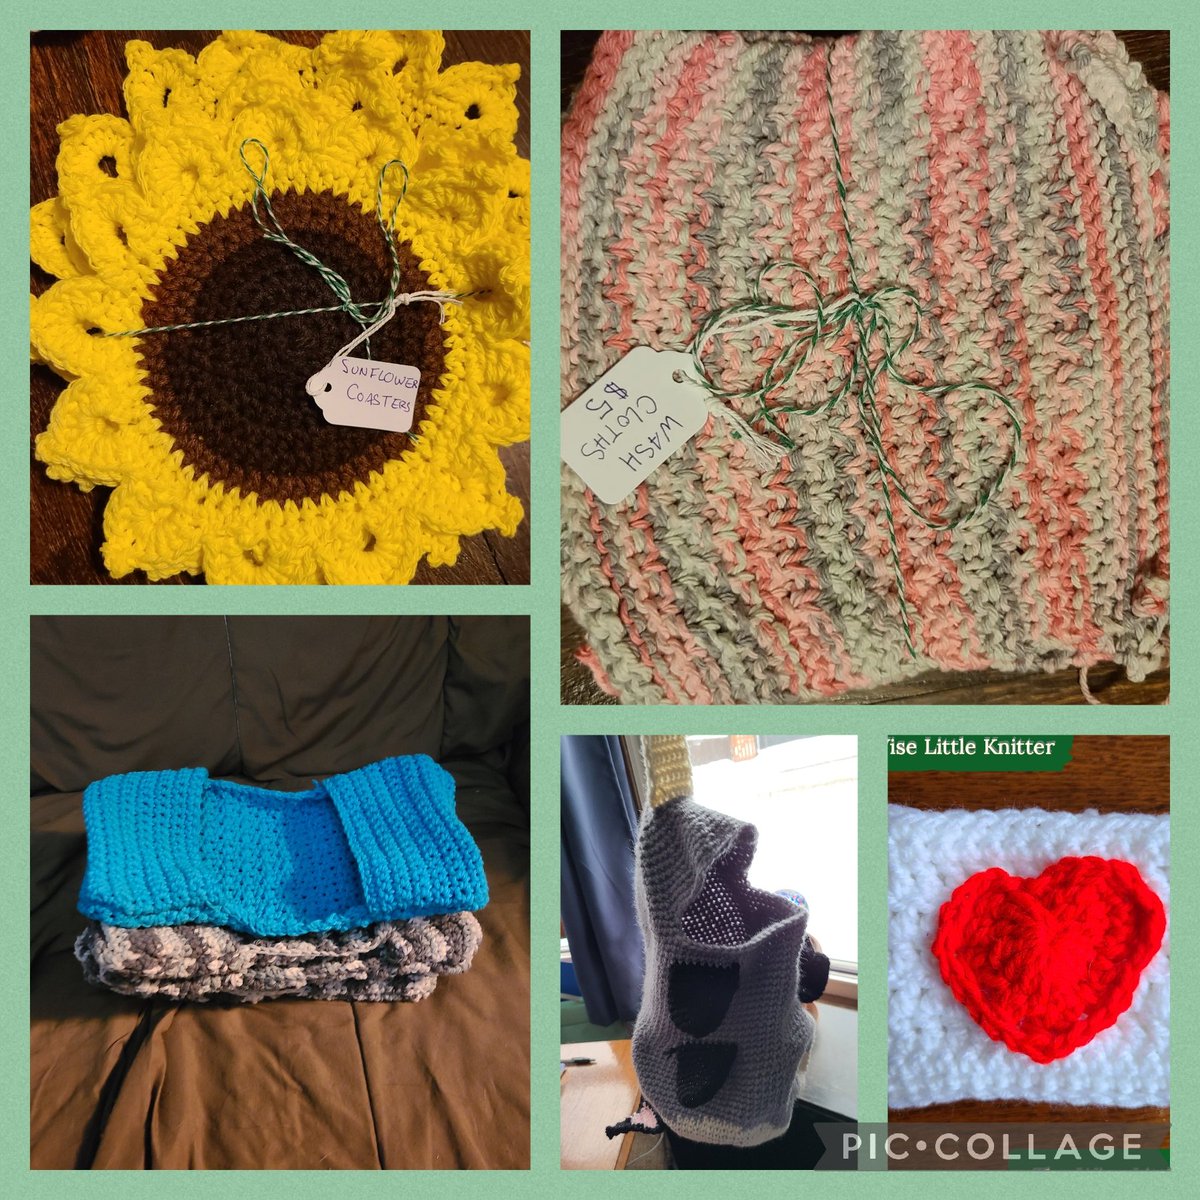 My goal with The Wise Little Knitter is to spread kindness and creativity. I want to make a difference in the world through my #knitting journey. #handmade #homemade #homemadewithlove #handmadewithlove #thewiselittleknitter #wherepracticalitymeetshomemade #niagaraontario #canada